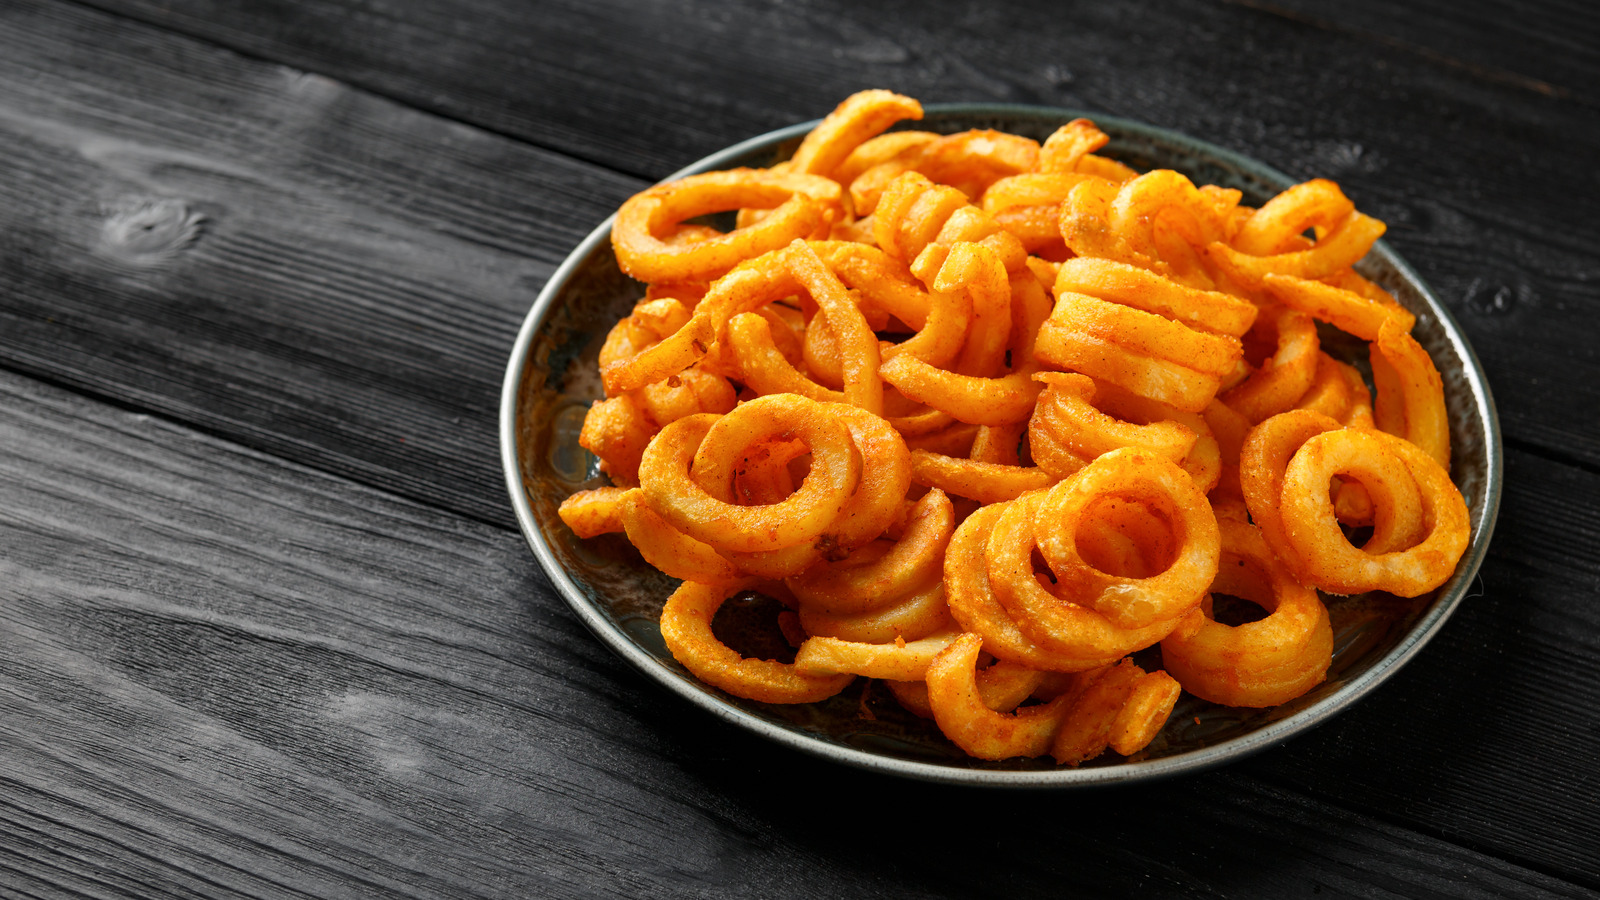 https://www.mashed.com/img/gallery/this-hack-allows-you-to-make-curly-fries-without-a-spiralizer/l-intro-1631837207.jpg